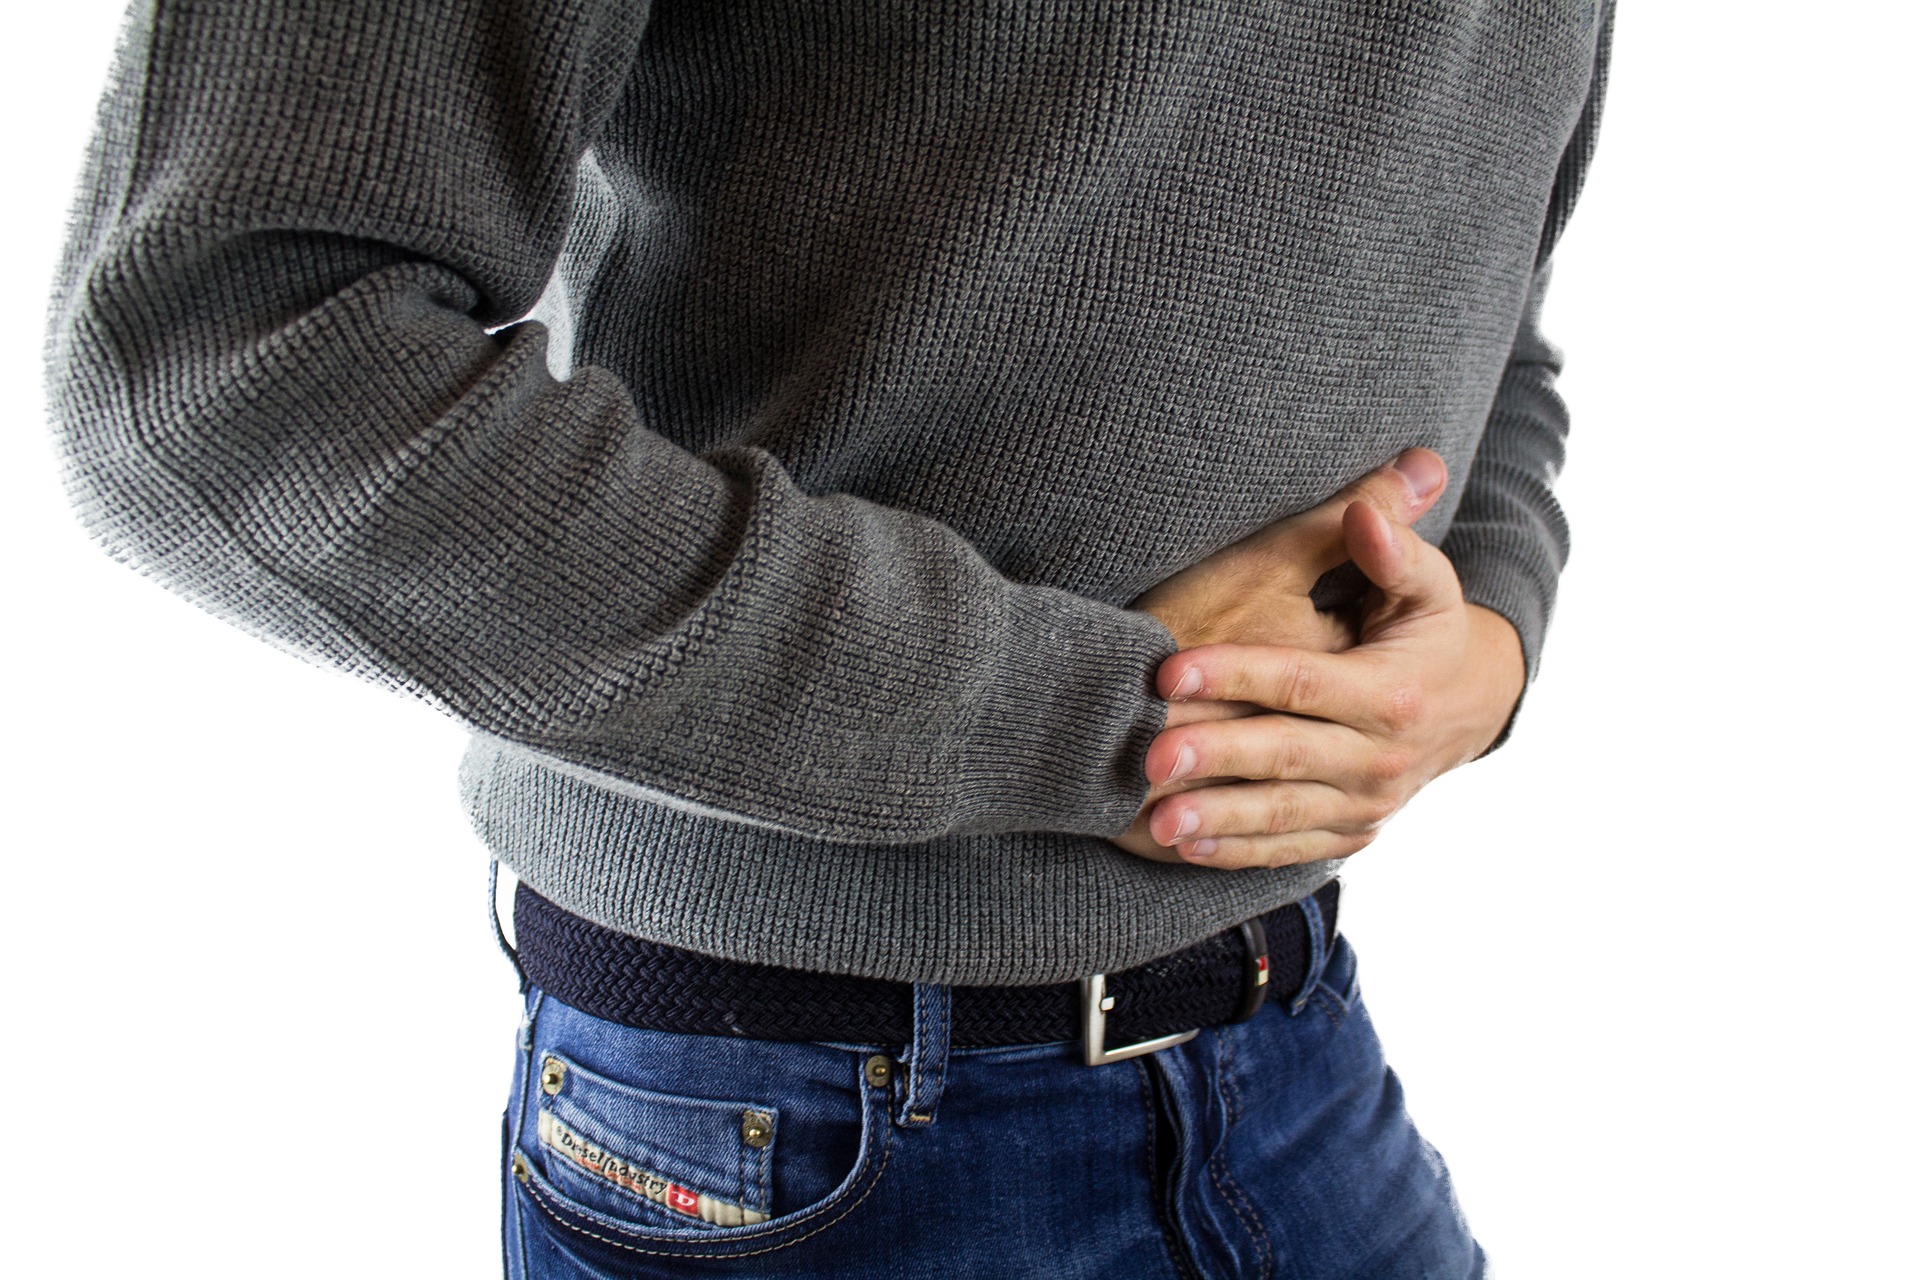 Signs & Symptoms of Irritable Bowel Syndrome